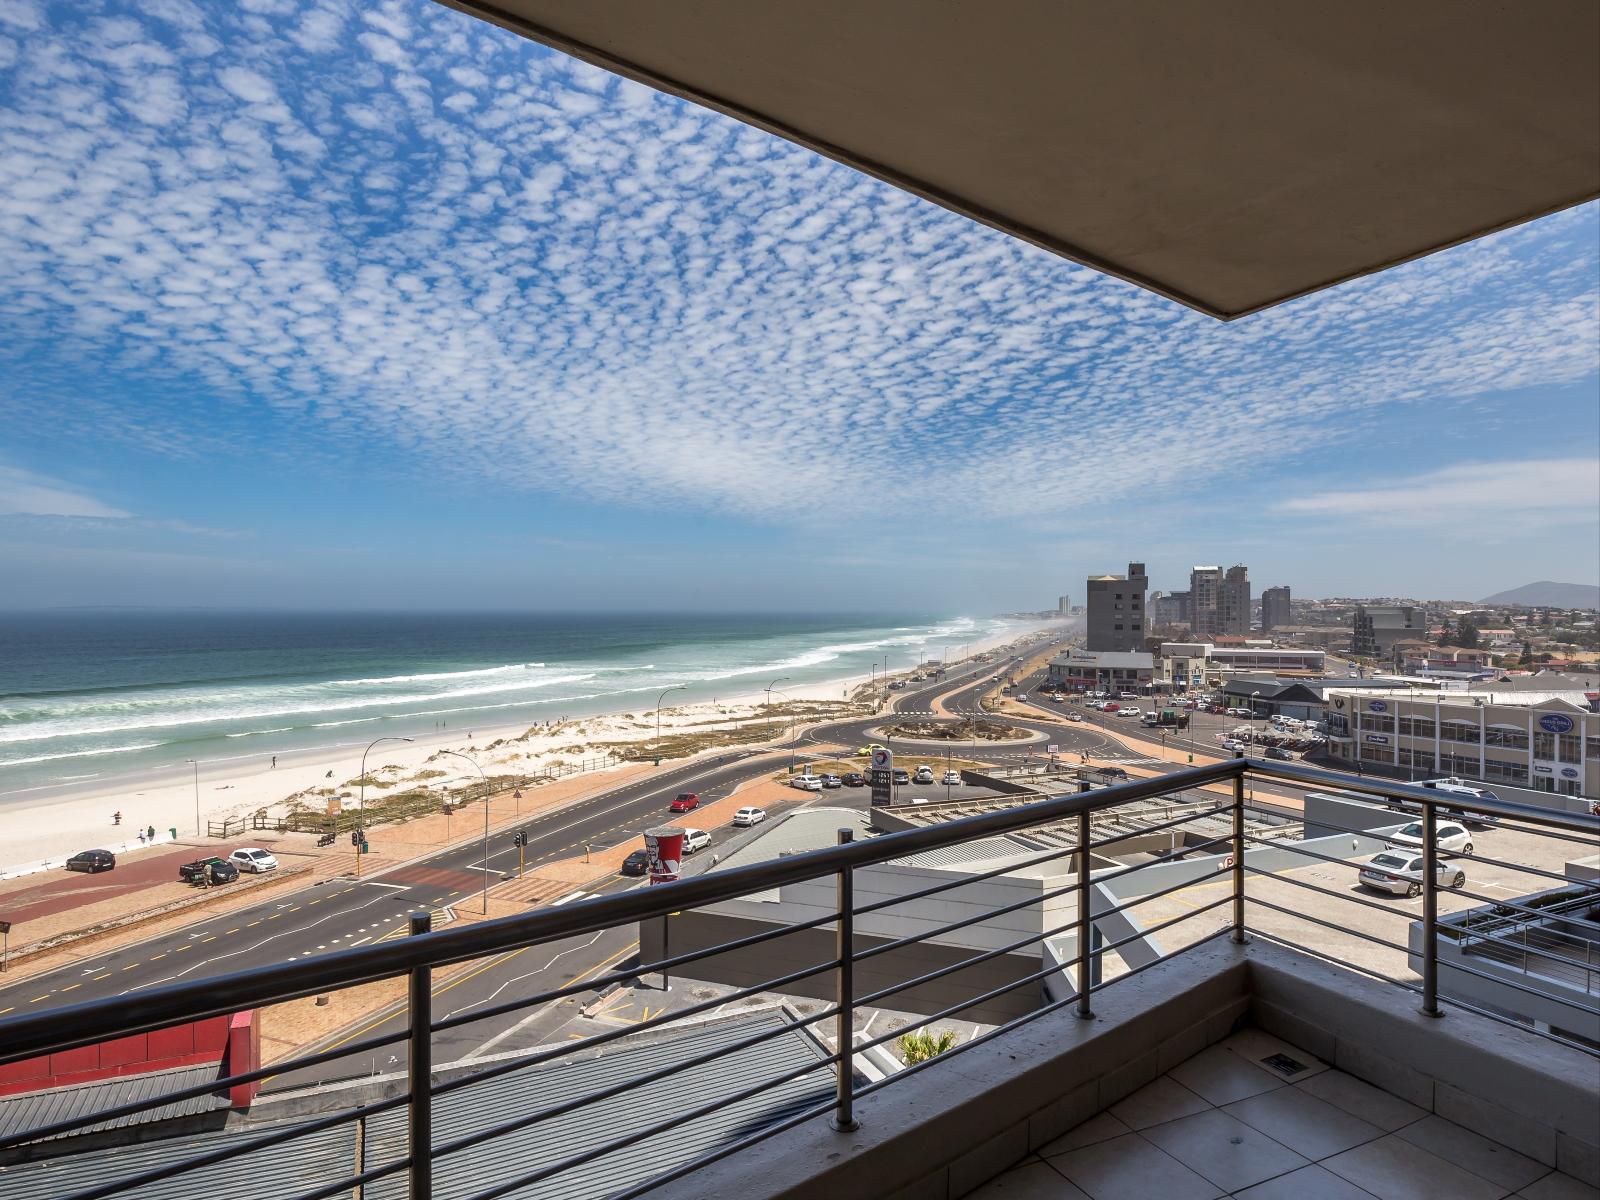 Atlantic Oasis Guest House Table View Blouberg Western Cape South Africa Beach, Nature, Sand, Skyscraper, Building, Architecture, City